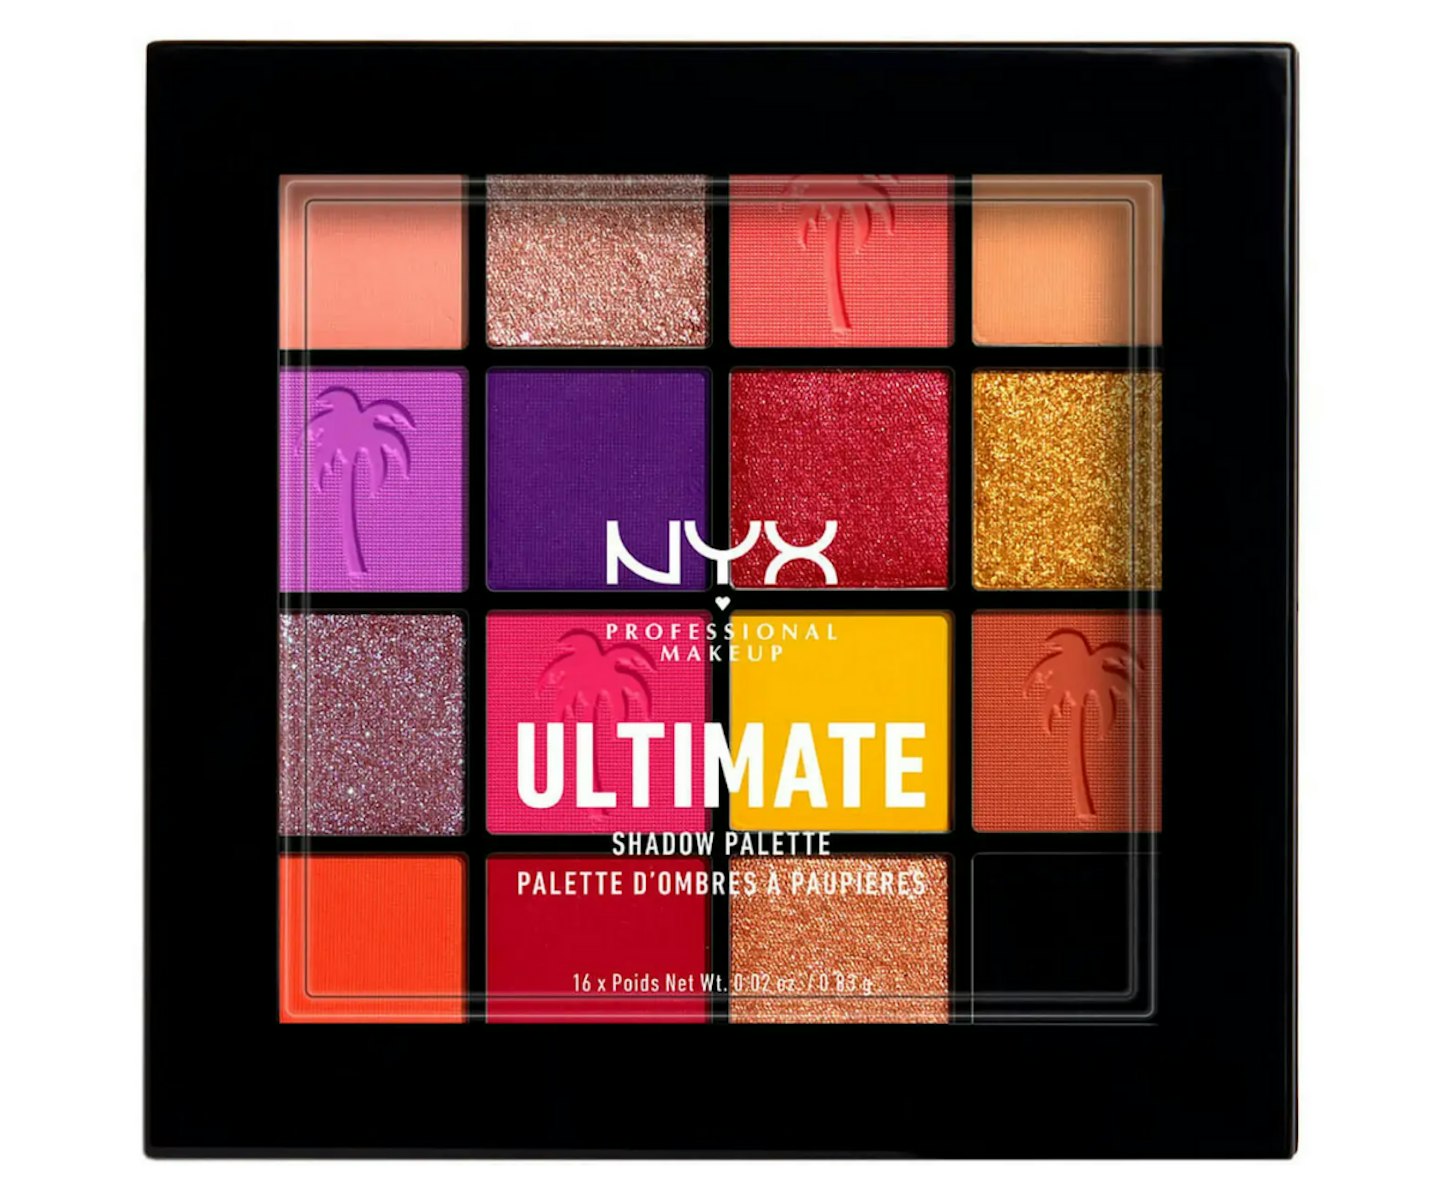 A picture of the NYX Ultimate Shadow Palette - Festival edition.